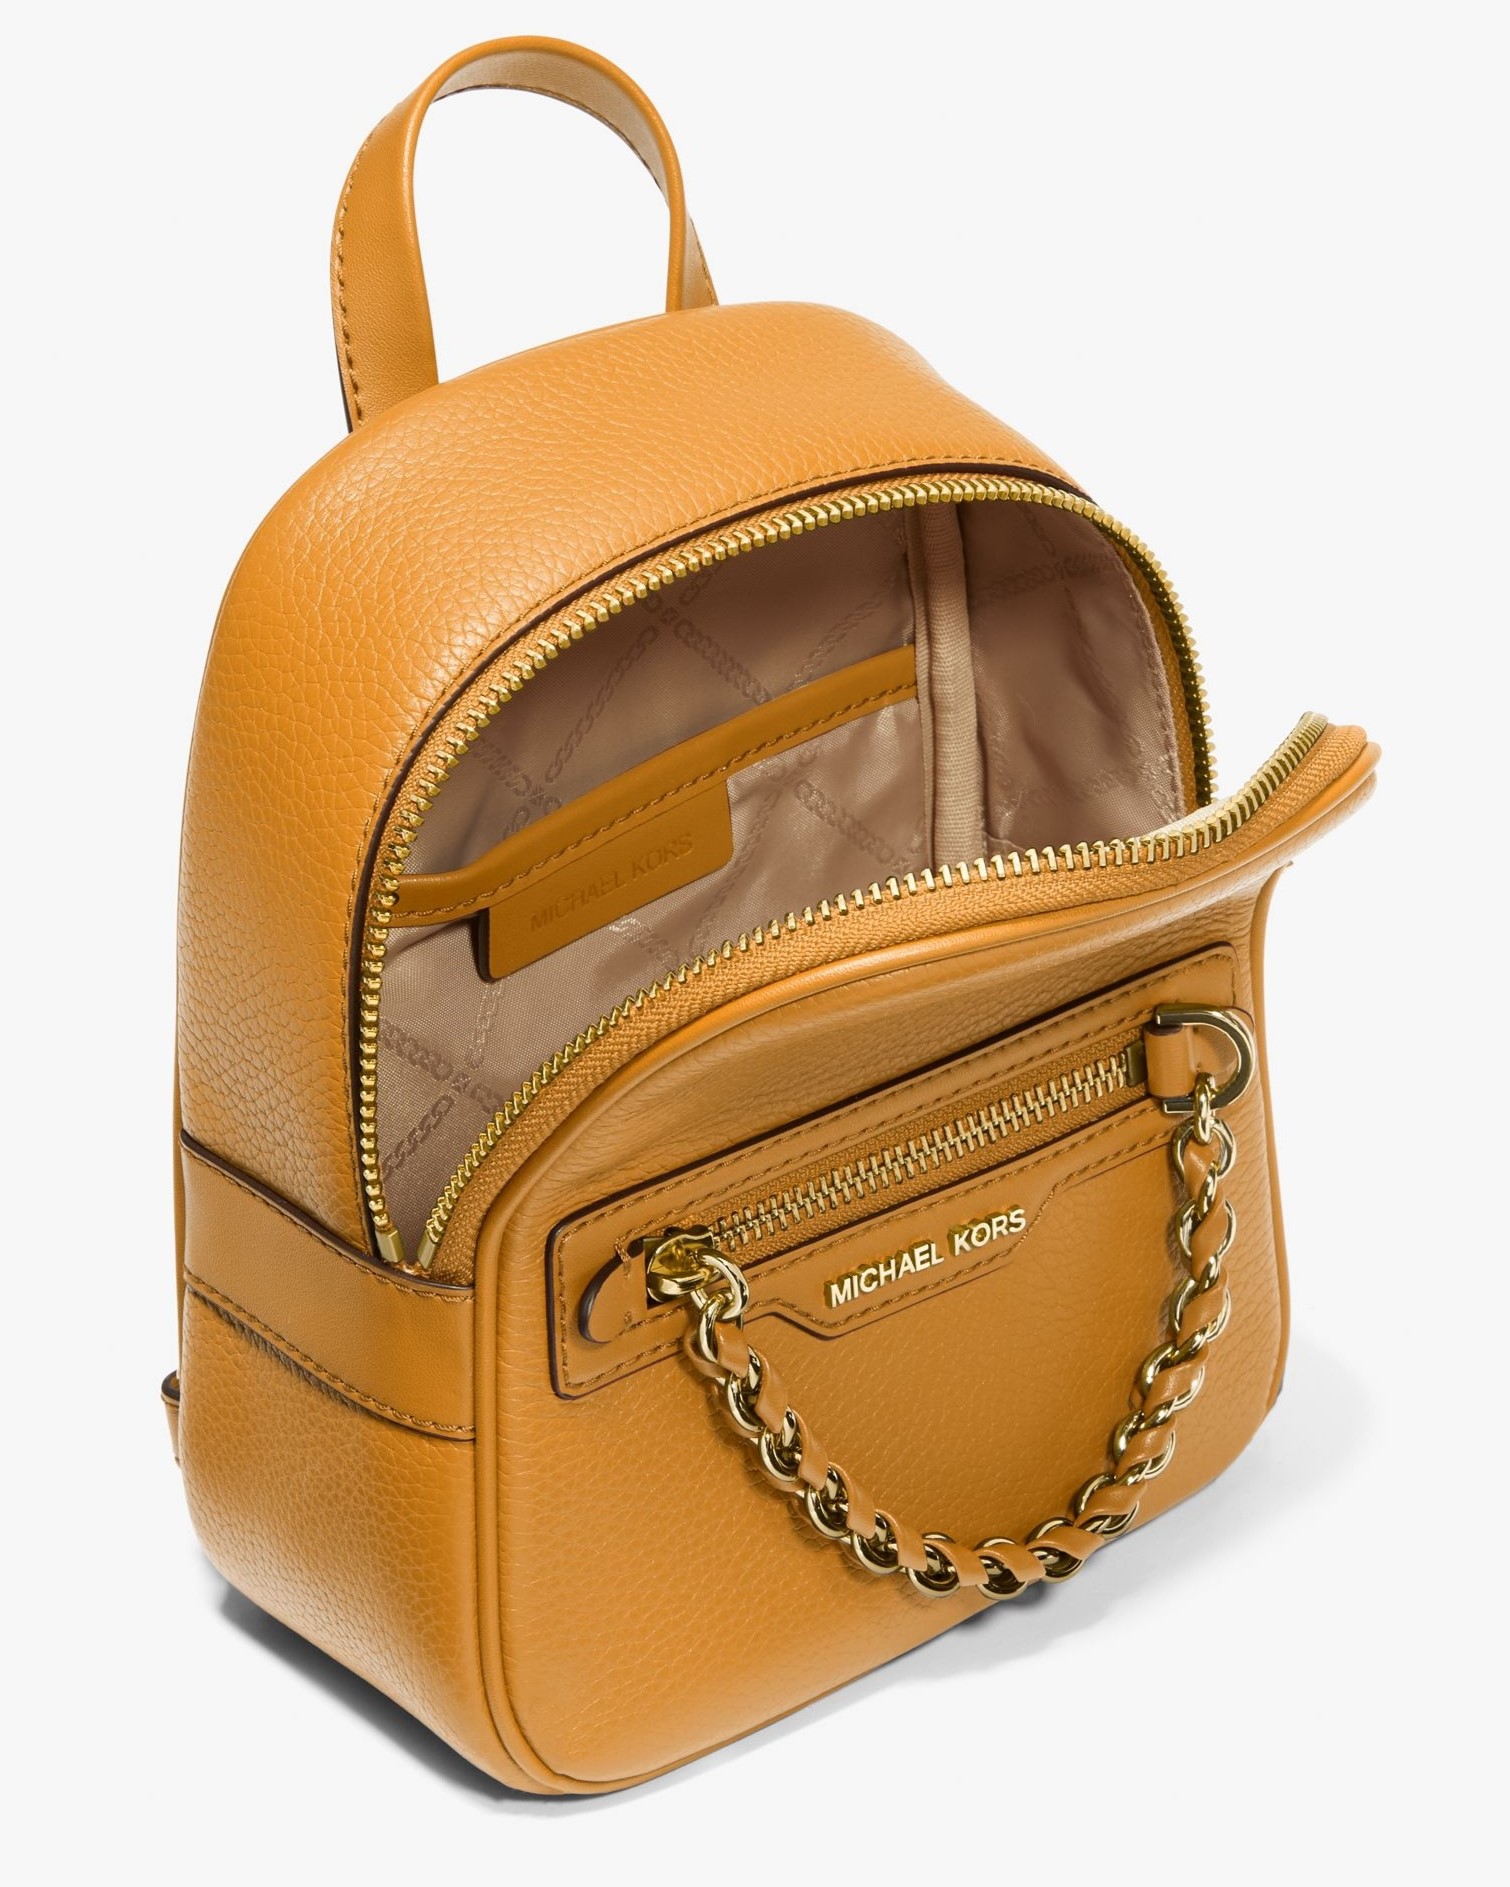 BALO MK NỮ MICHAEL KORS ELLIOT EXTRA SMALL YELLOW LEATHER BACKPACK 30F3G5EB0L878 1